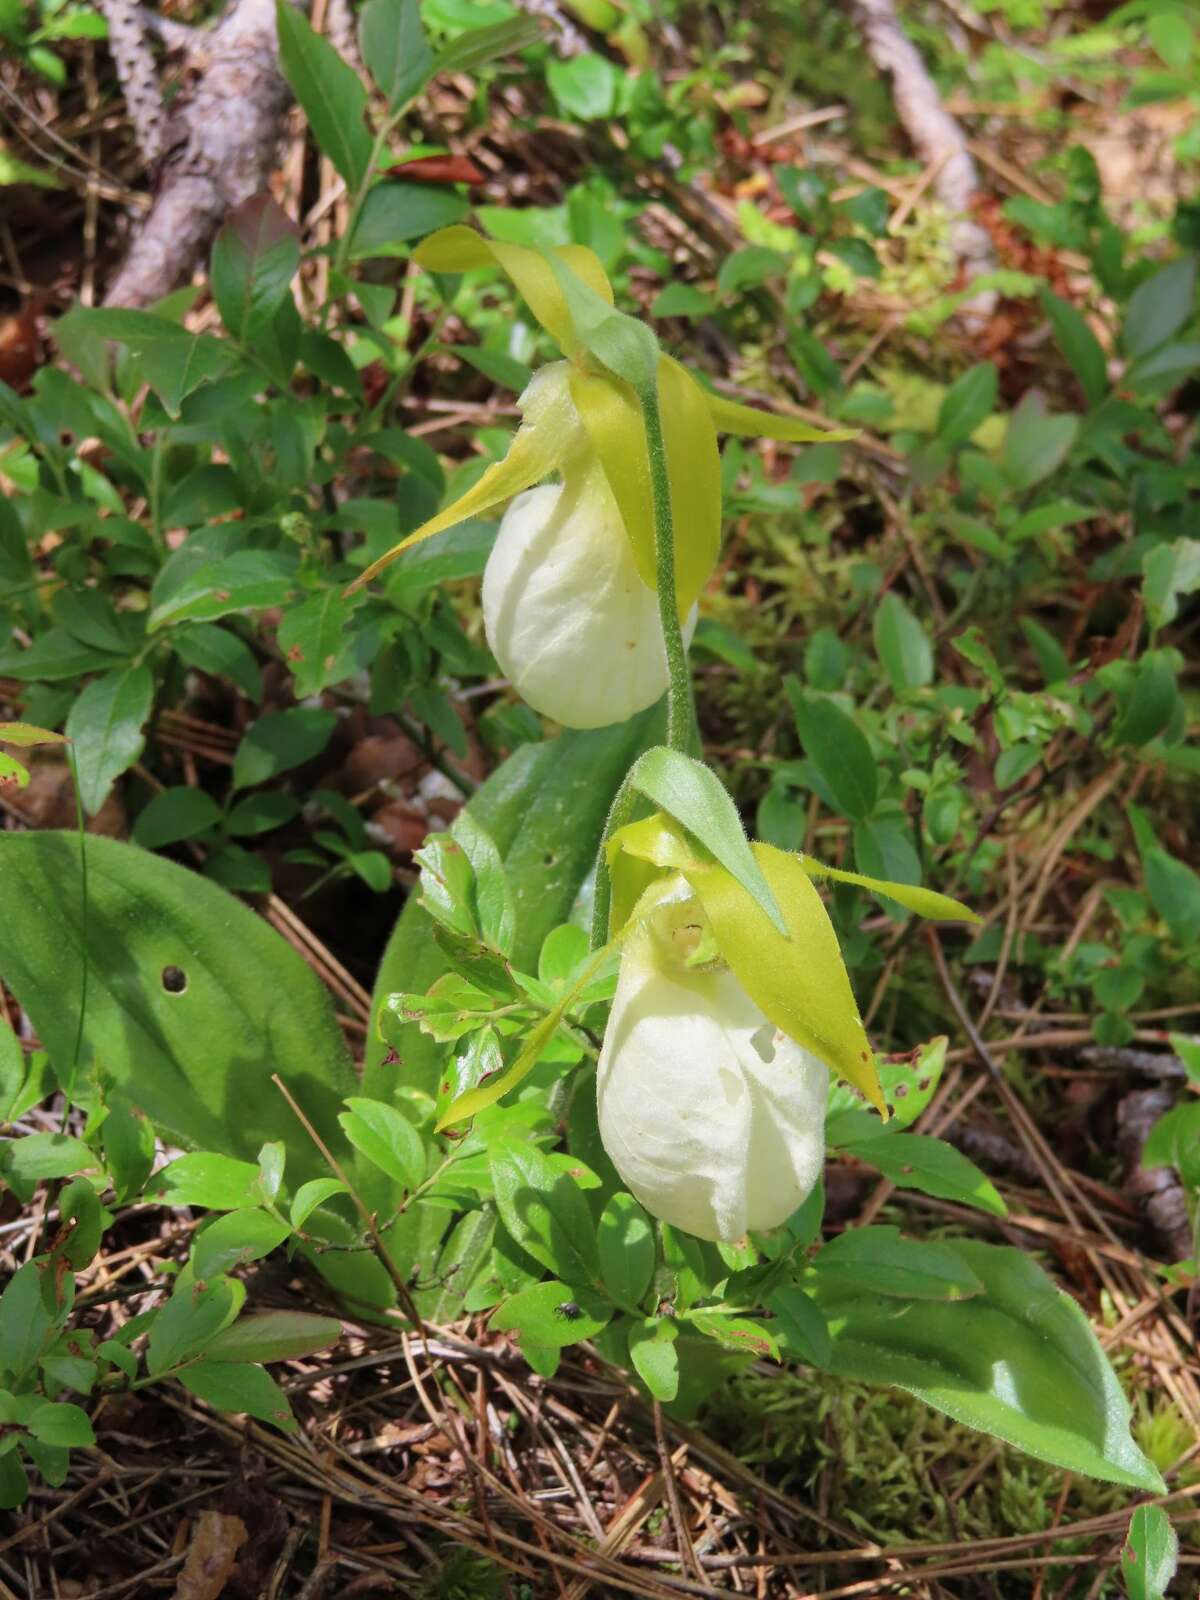 A lady slipper near the summit of Five Mile Mountain in the Adirondacks. Lady slippers can live for 20 or more years.